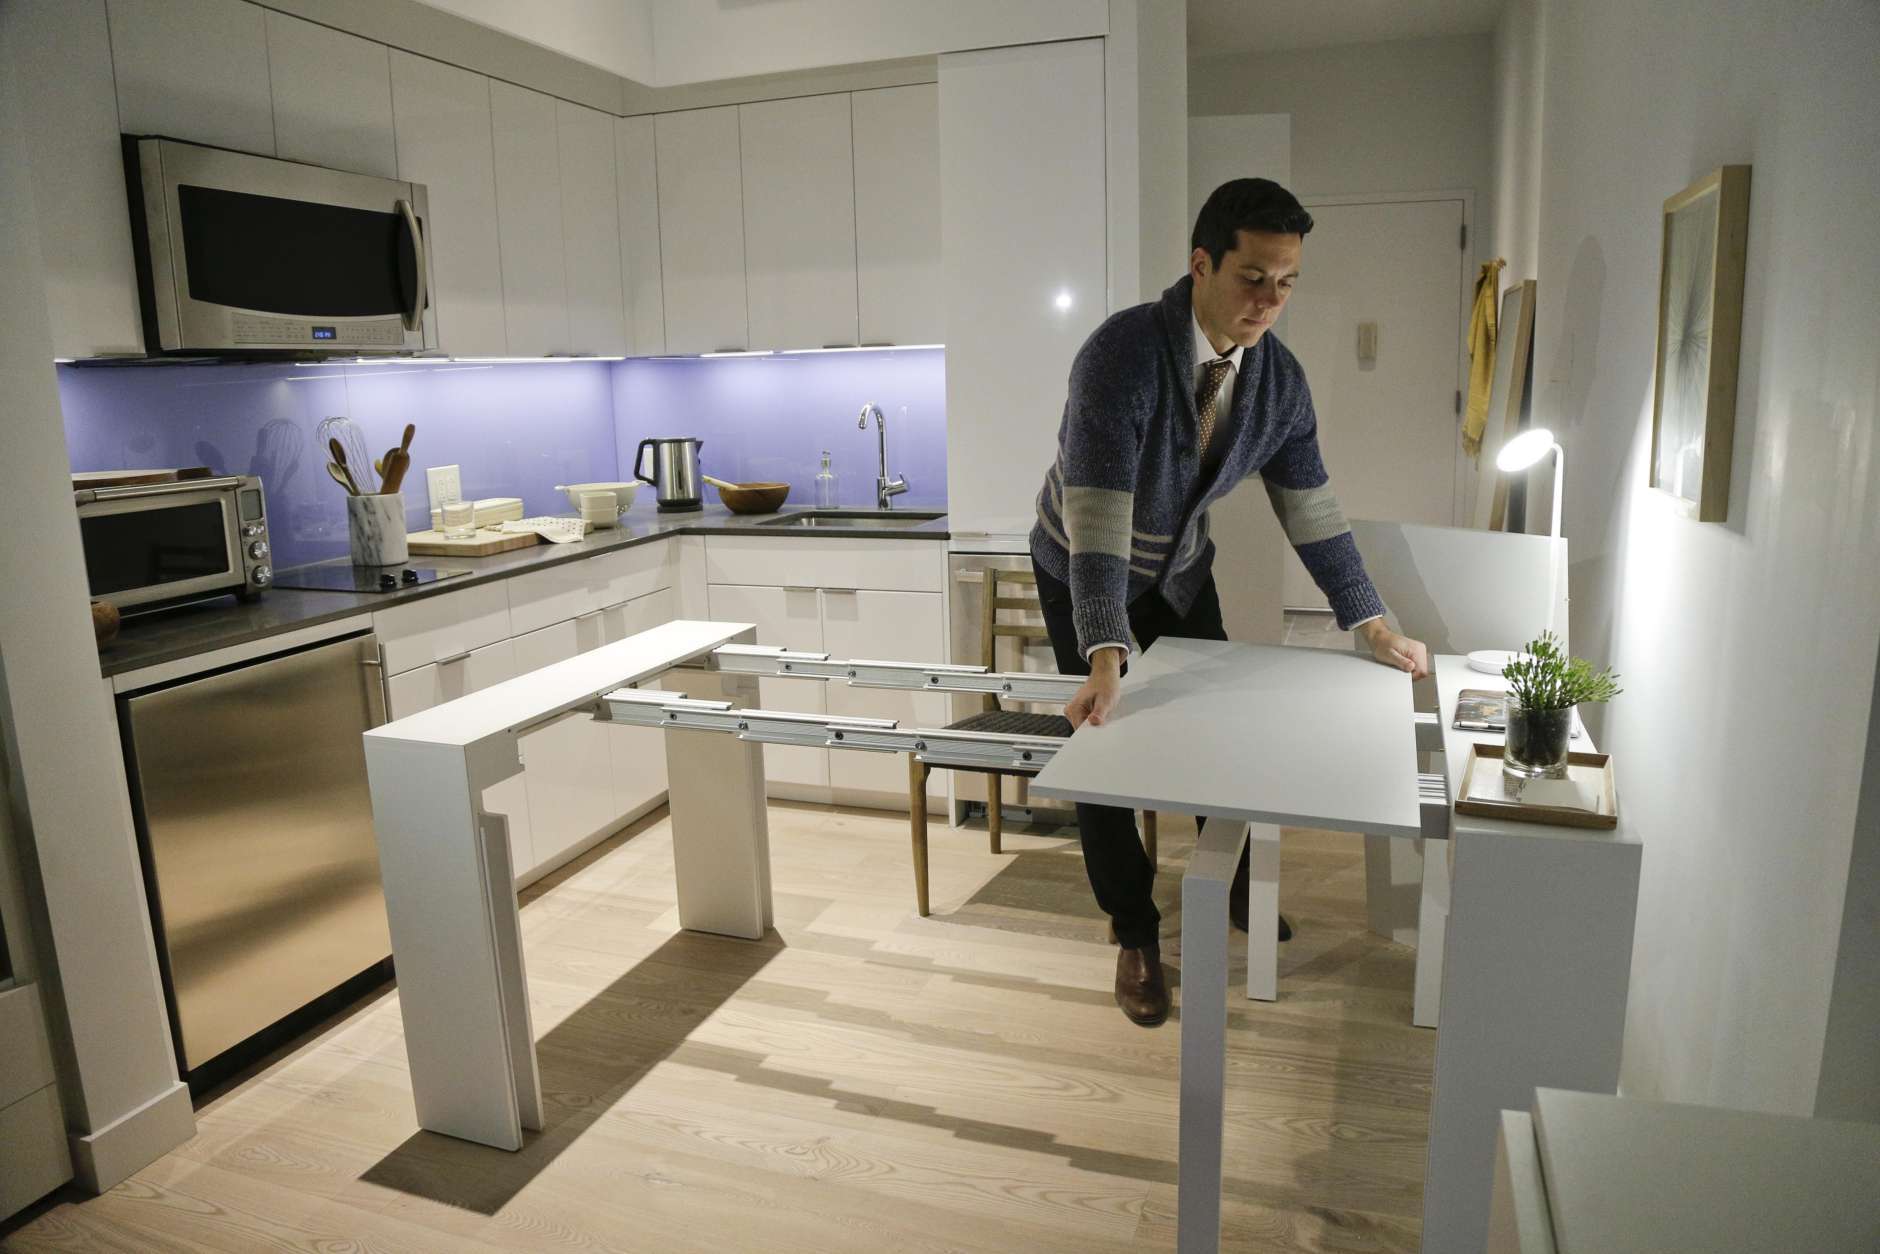 In this Dec. 22, 2015, photo, Stage 3 Properties co-founder Christopher Bledsoe demonstrates a desk that expands into a dining table that can seat up to 12 people inside one of the apartments at the Carmel Place building in New York. As the city-sponsored micro-apartment project nears completion, its setting an example for tiny dwellings that the nations biggest city sees as an aid to easing its affordable housing crunch. (AP Photo/Julie Jacobson)